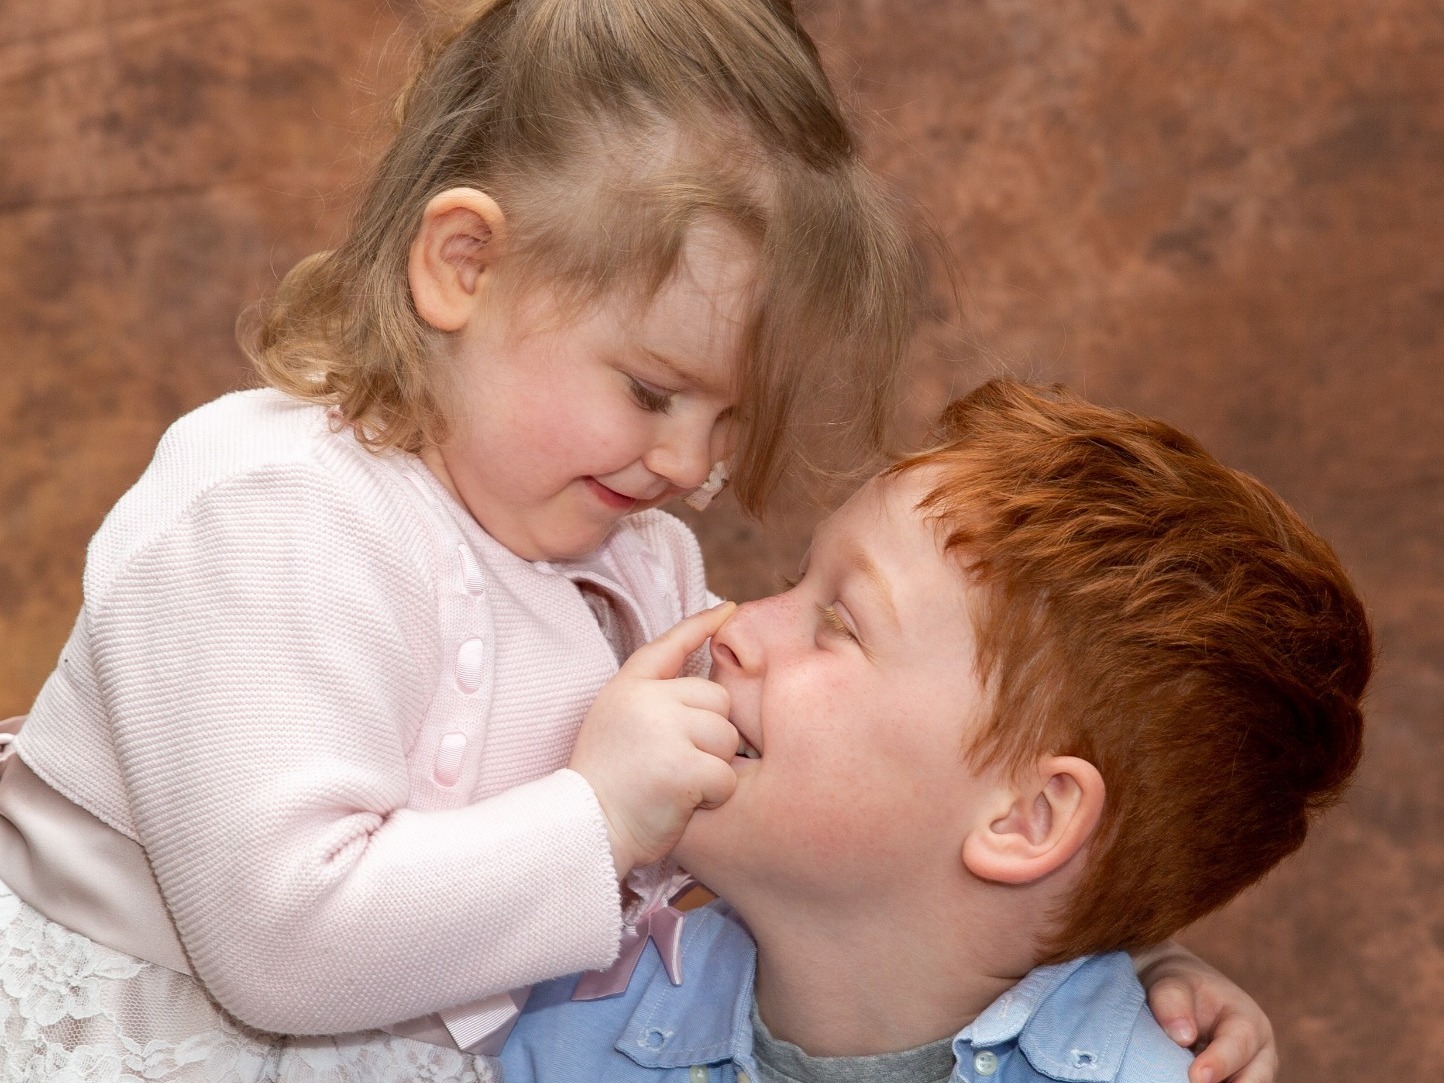 A toddler girl with medical condition posing for a photograph with her older brother at a Hospice